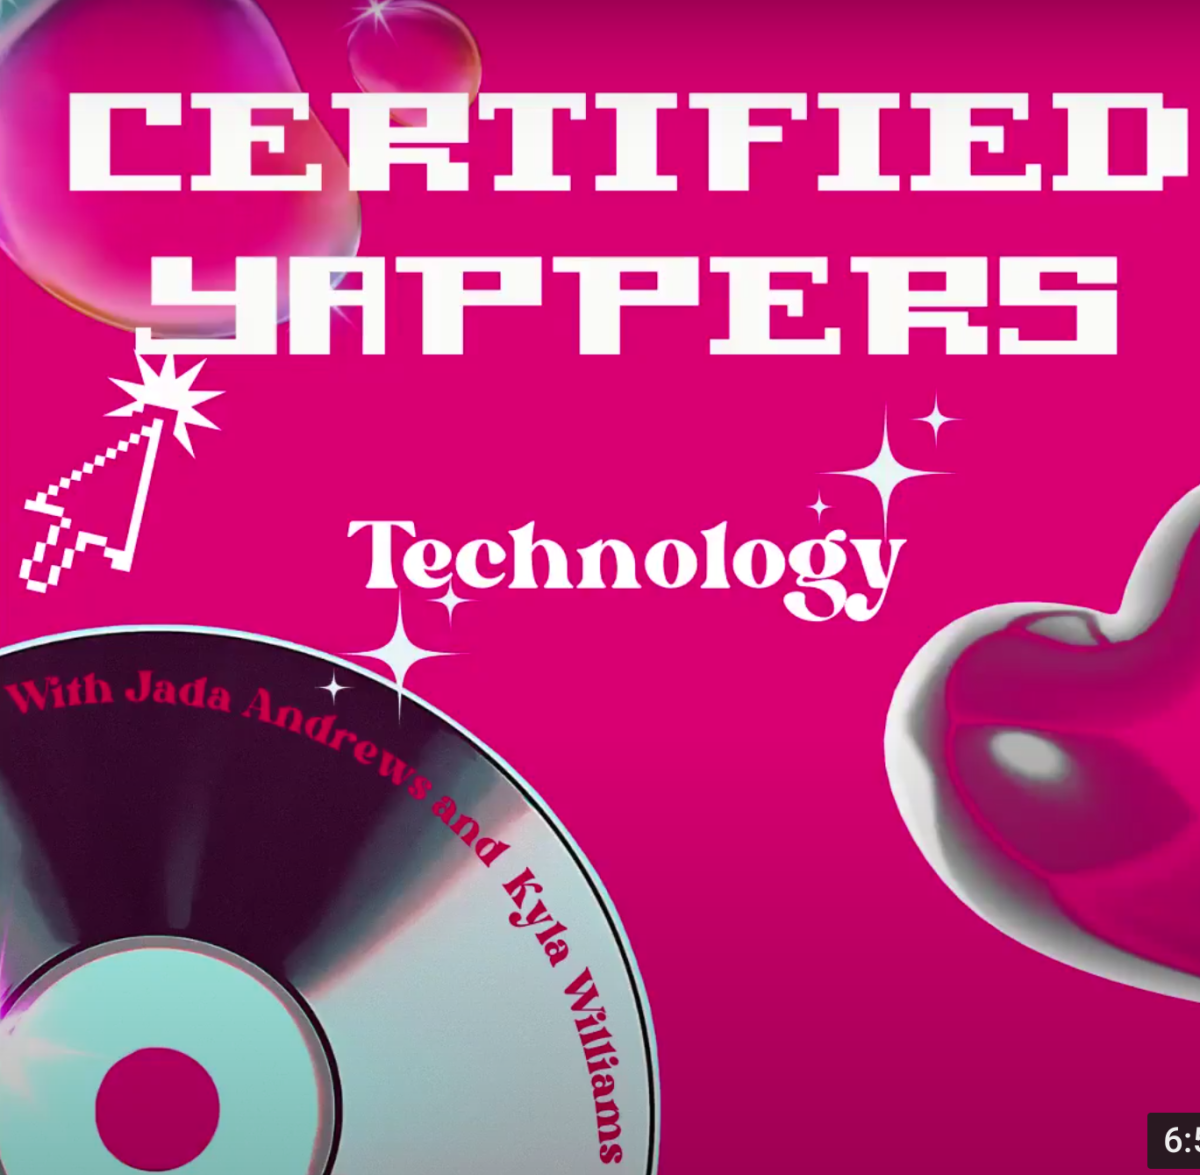 Certified Yappers Episode 2: Technologys impact on teenagers